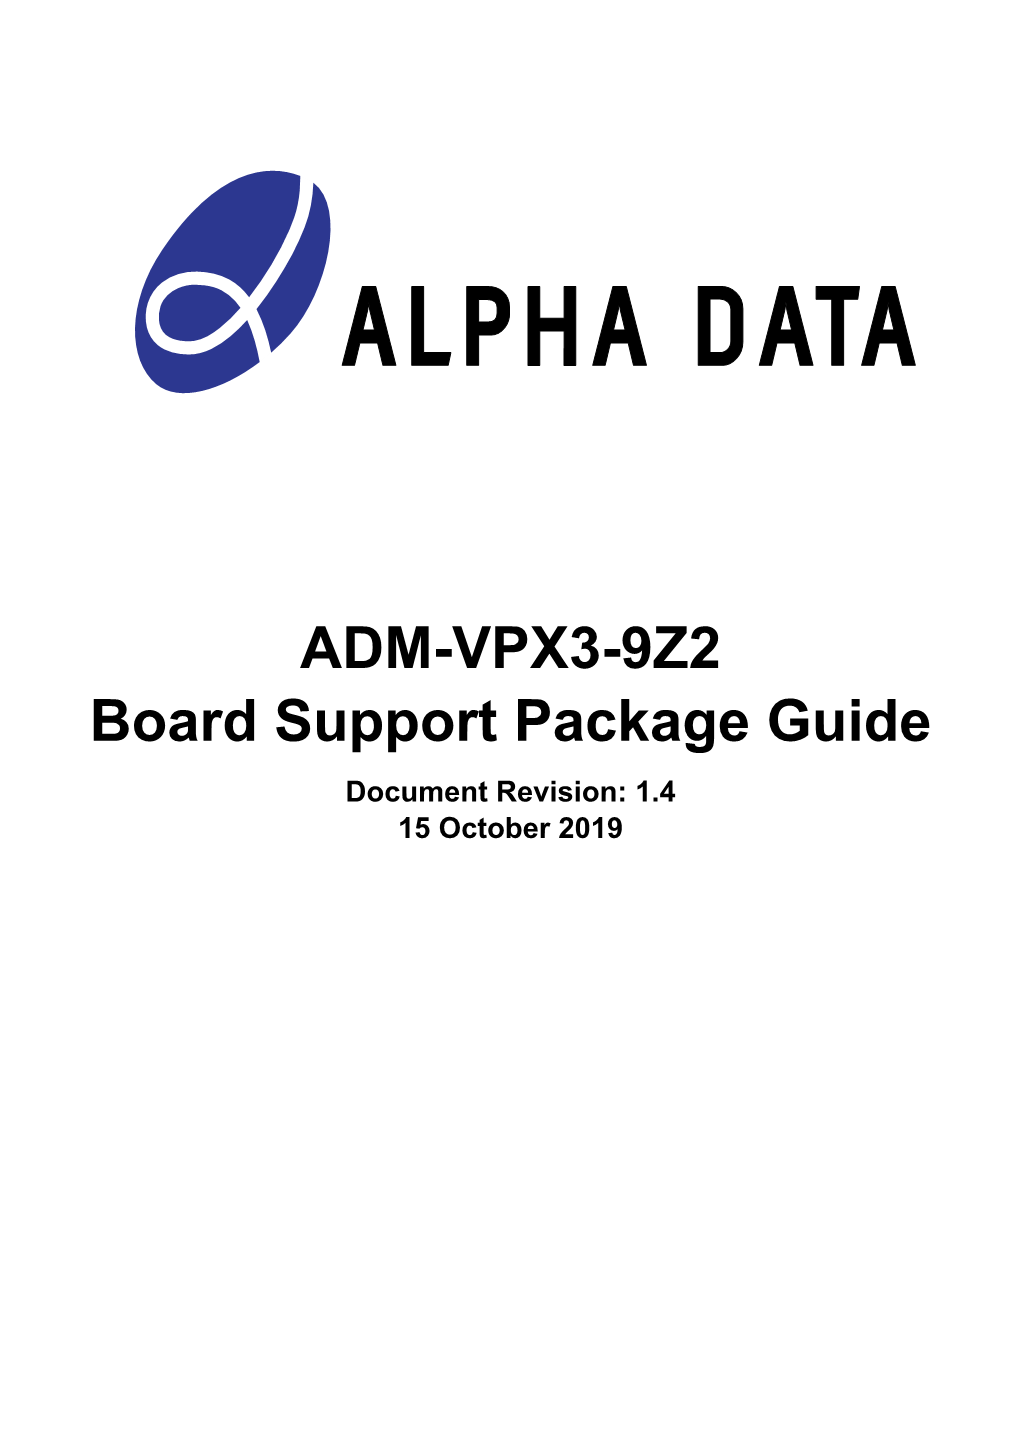 ADM-VPX3-9Z2 Board Support Package Guide V1.4 - 15 October 2019